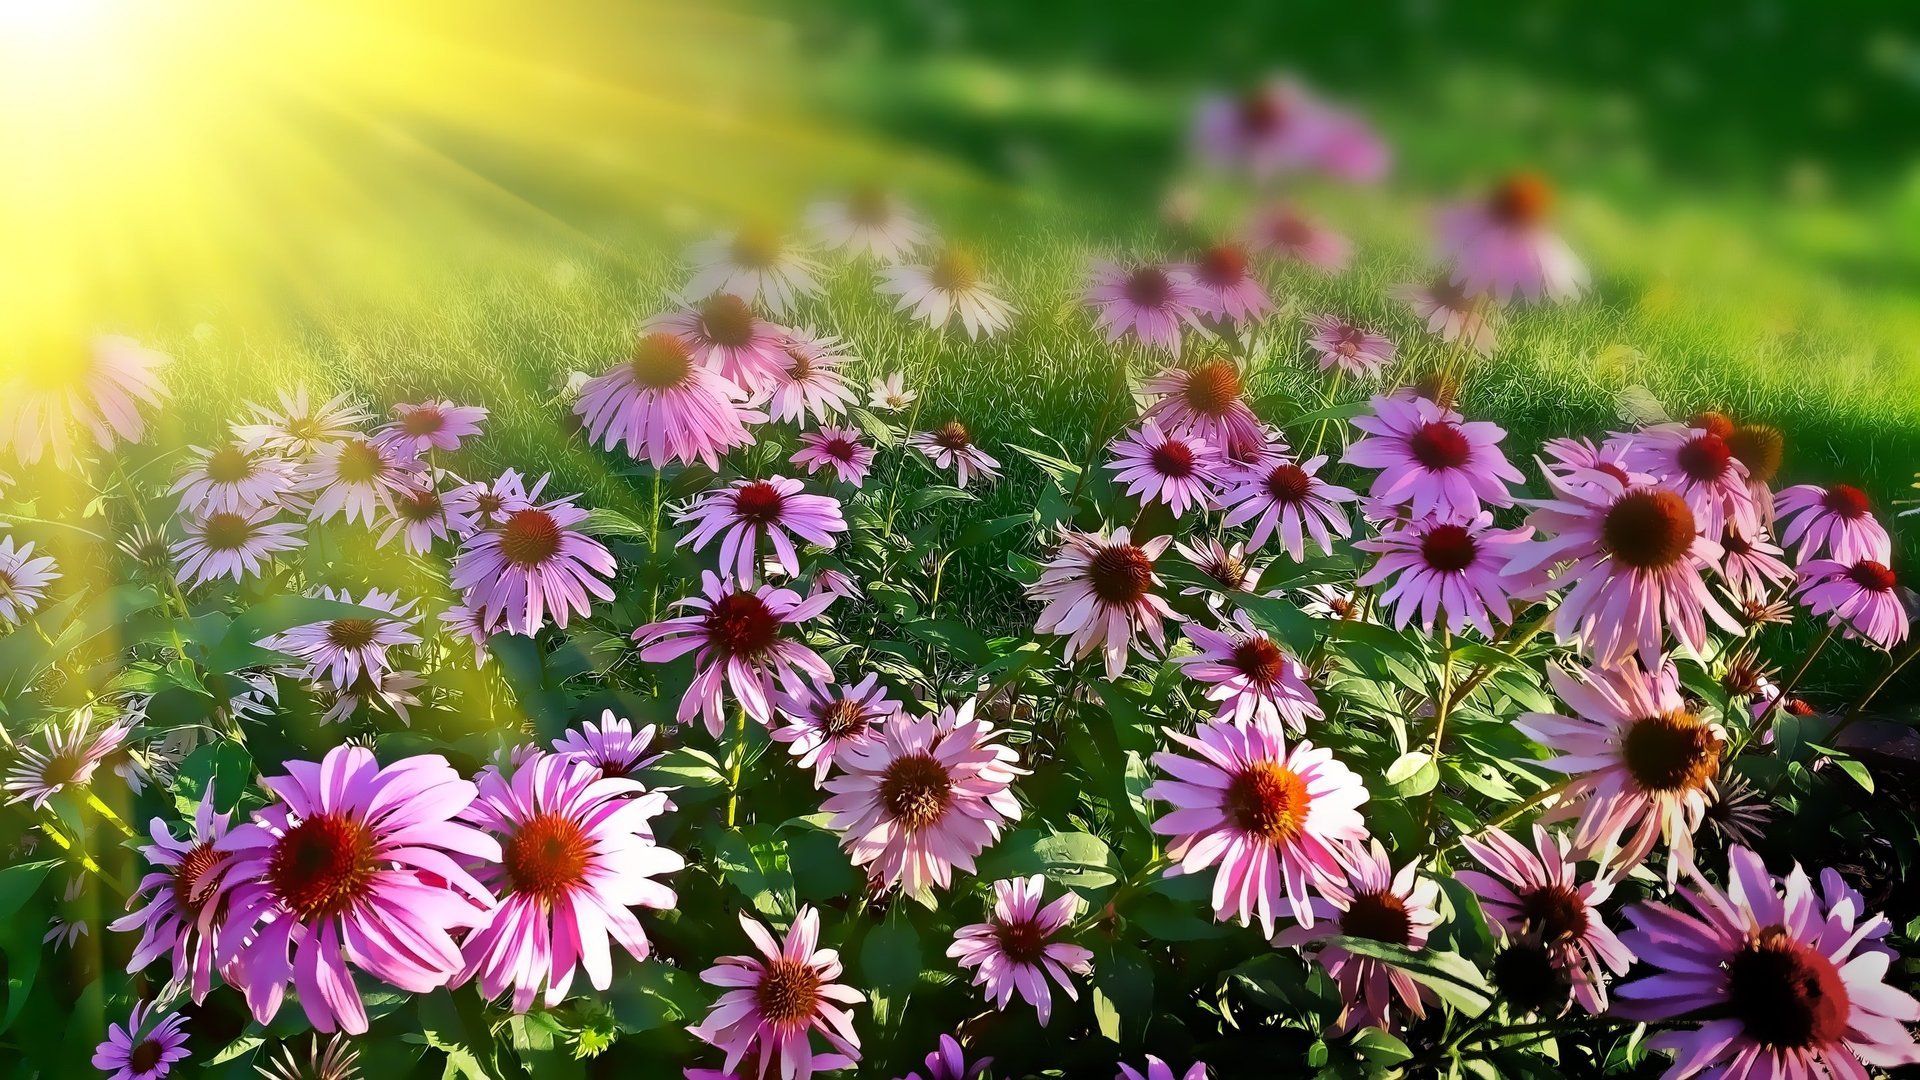 a field of purple daisies with the sun shining through them